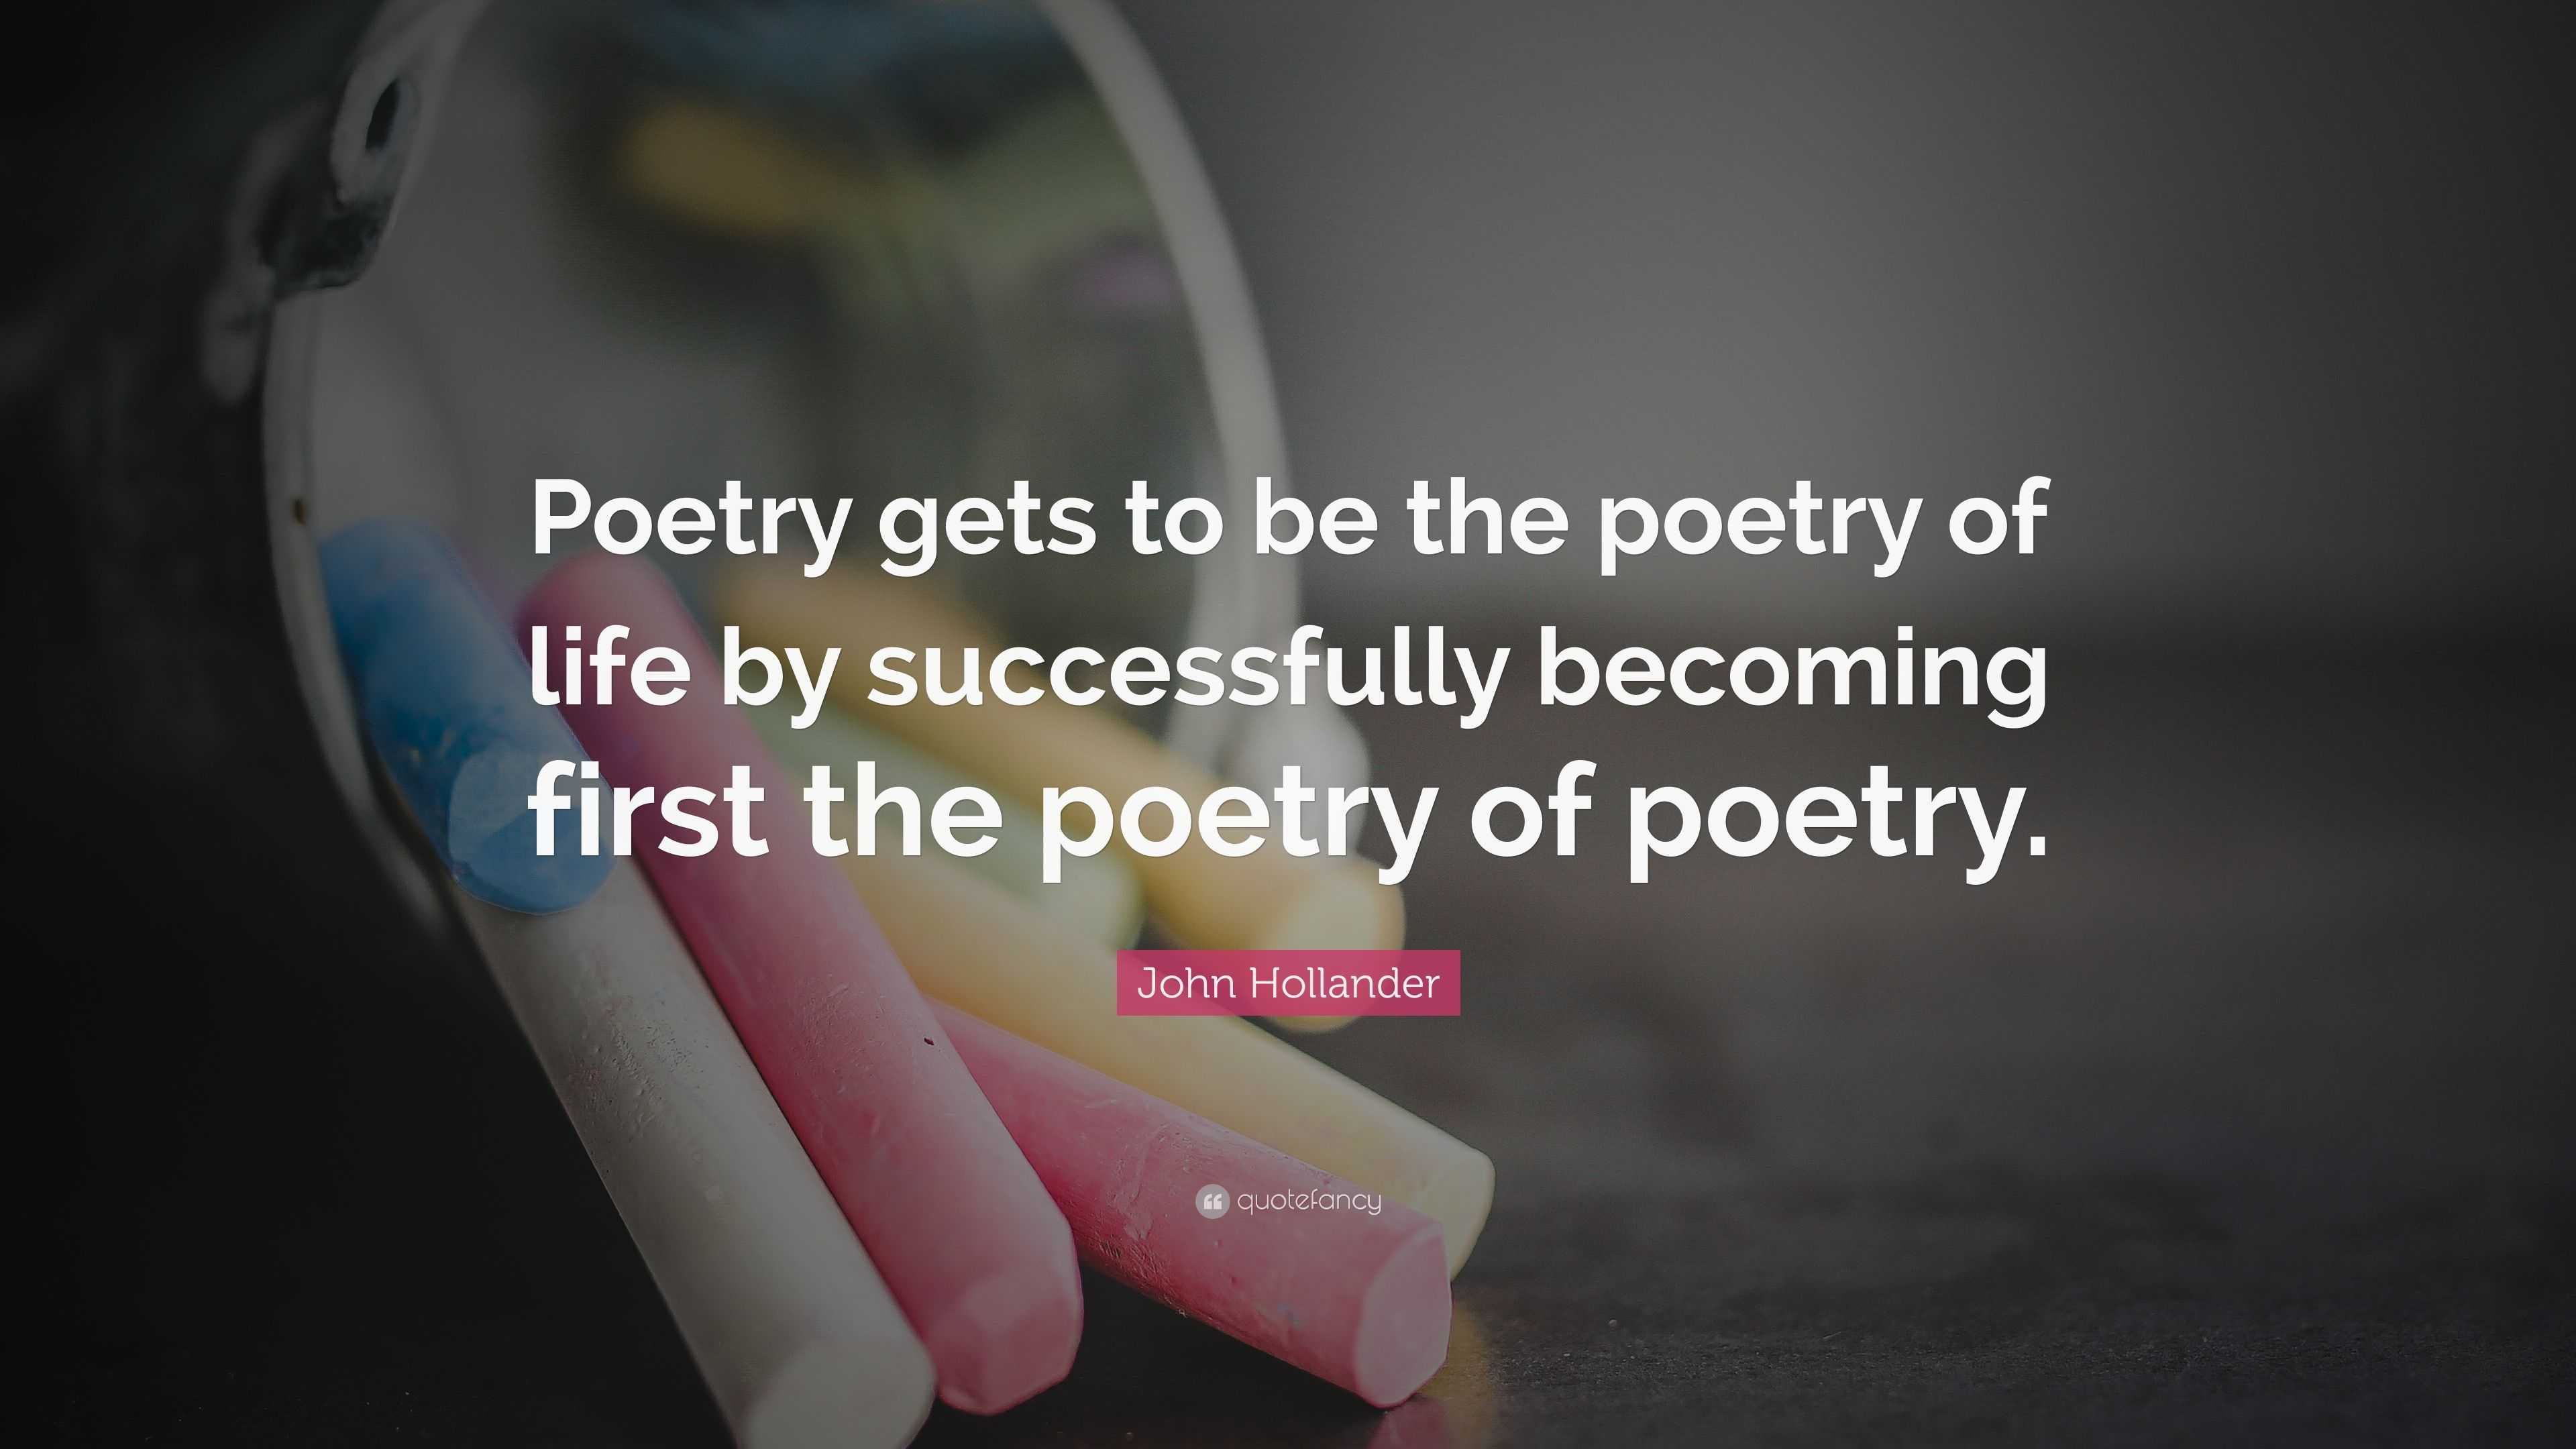 John Hollander Quote: “Poetry gets to be the poetry of life by ...